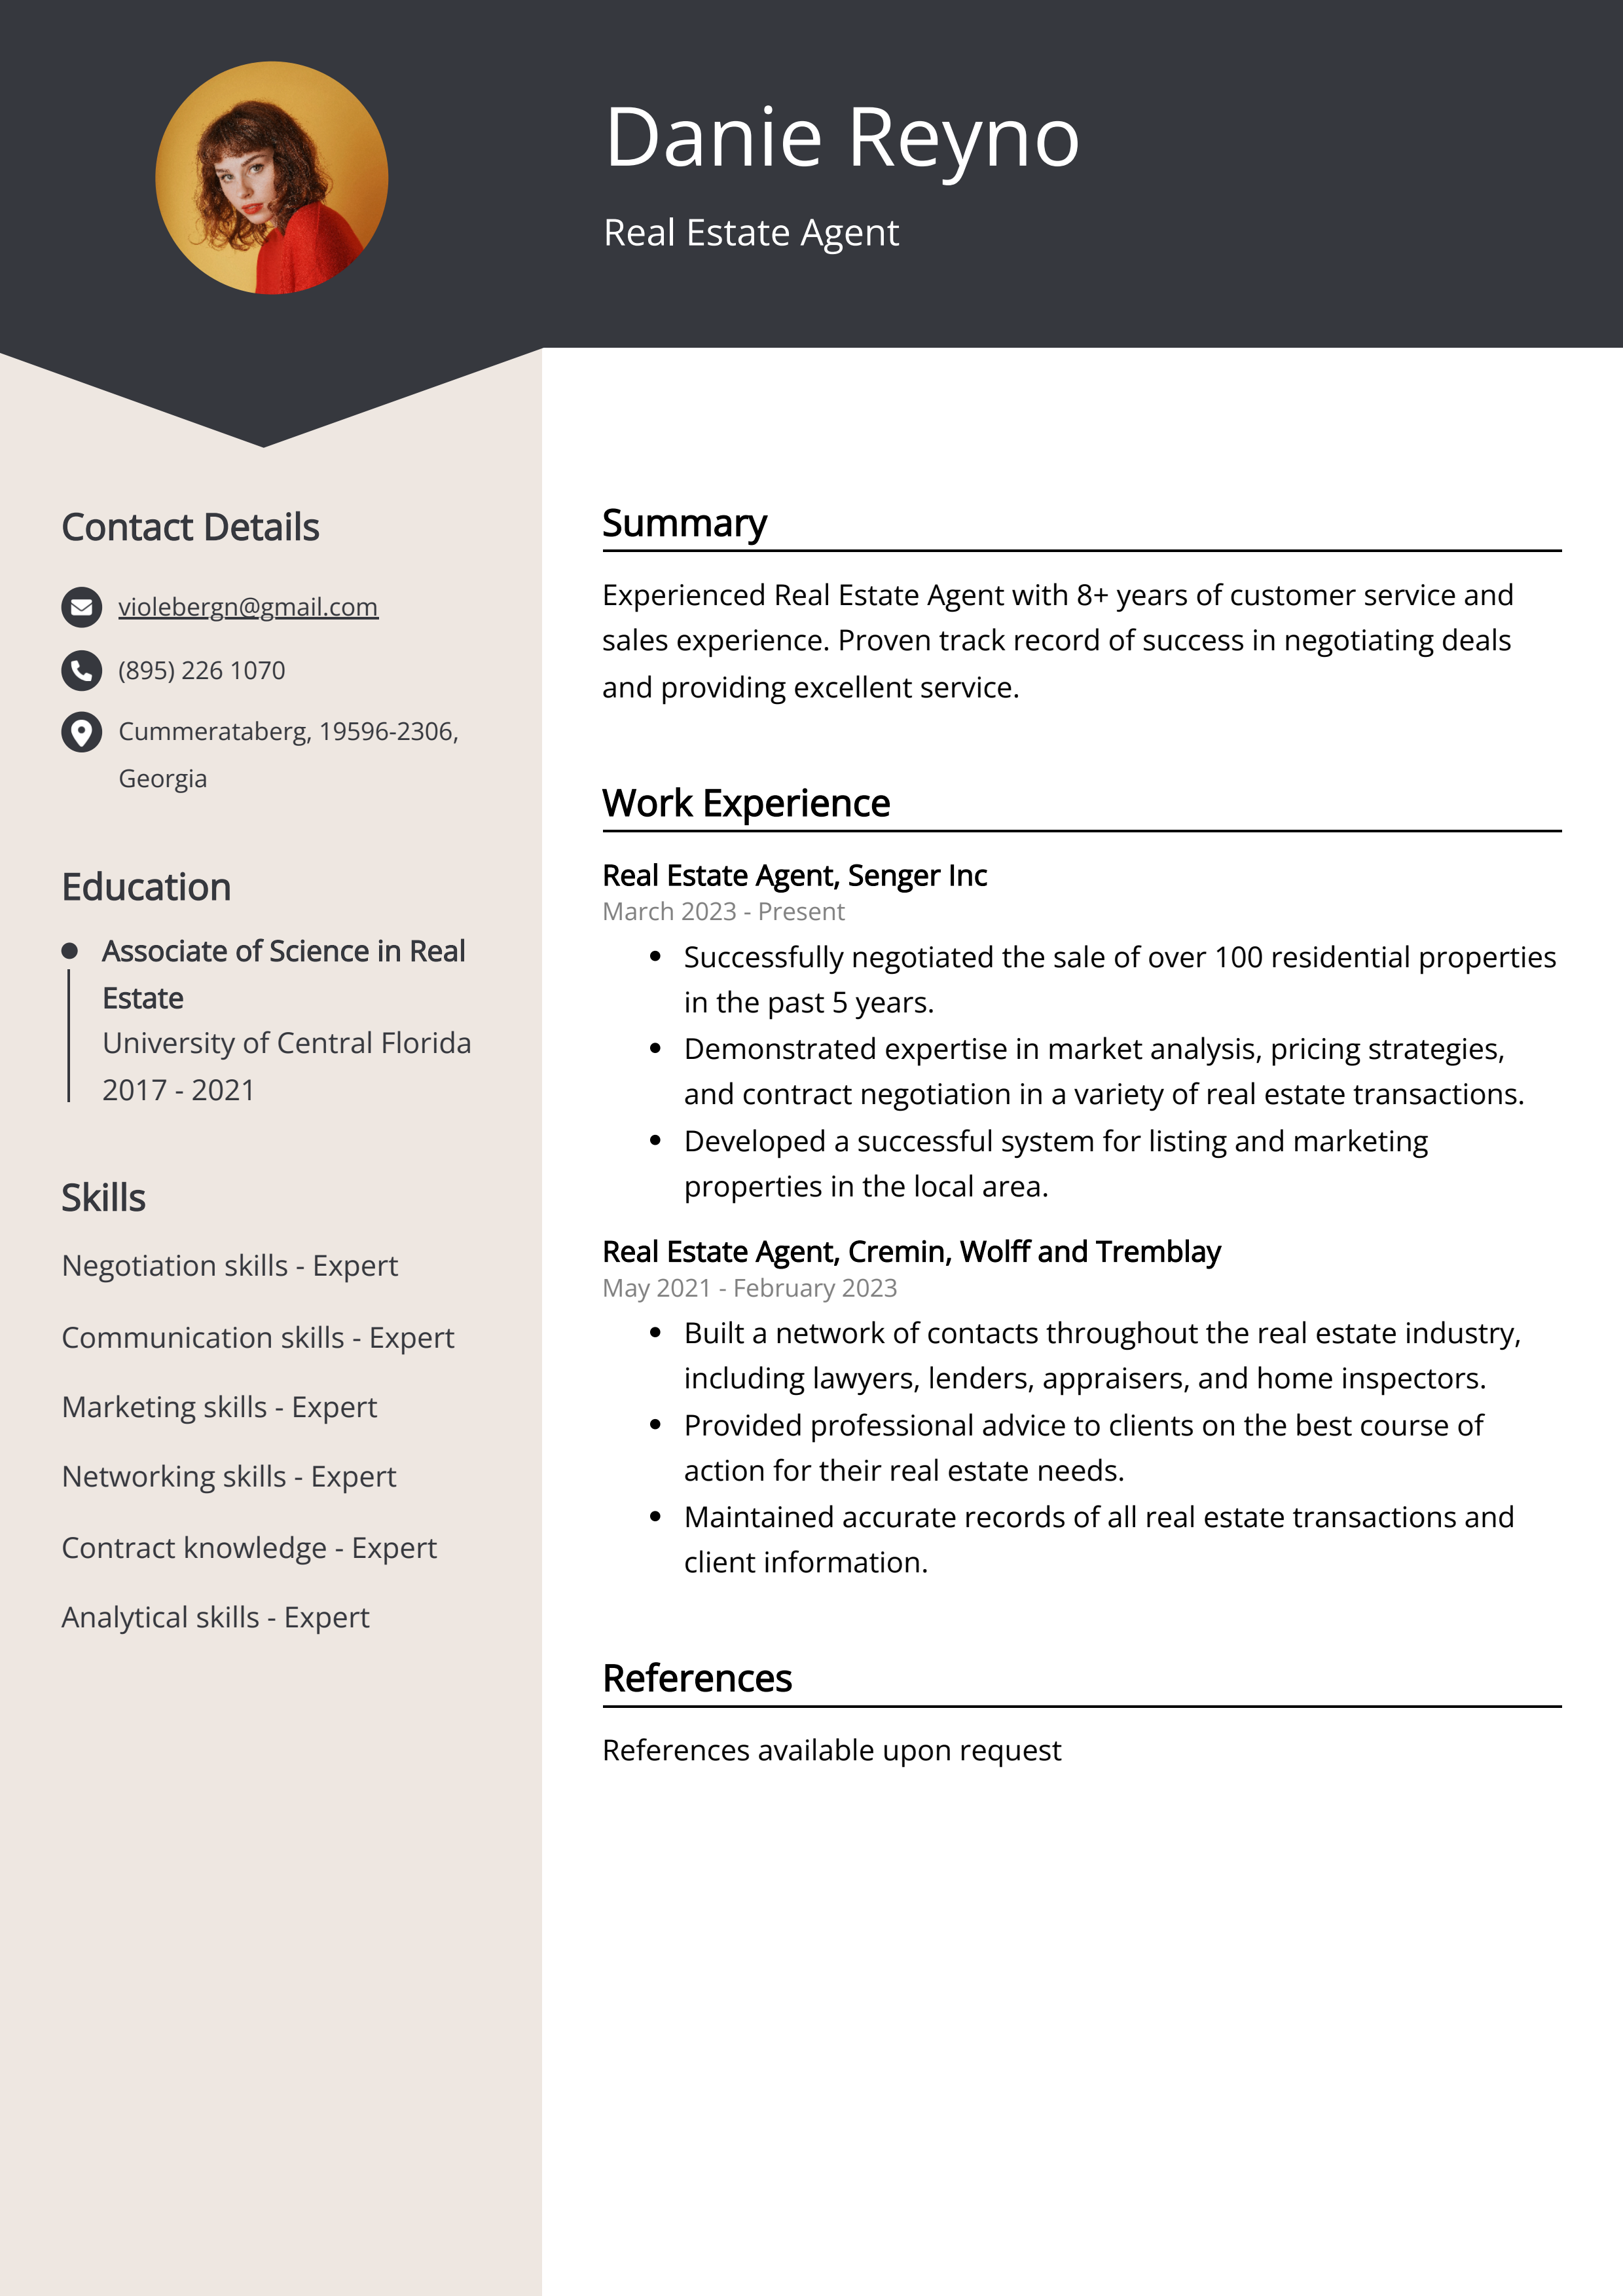 Experienced Real Estate Agent Resume Example